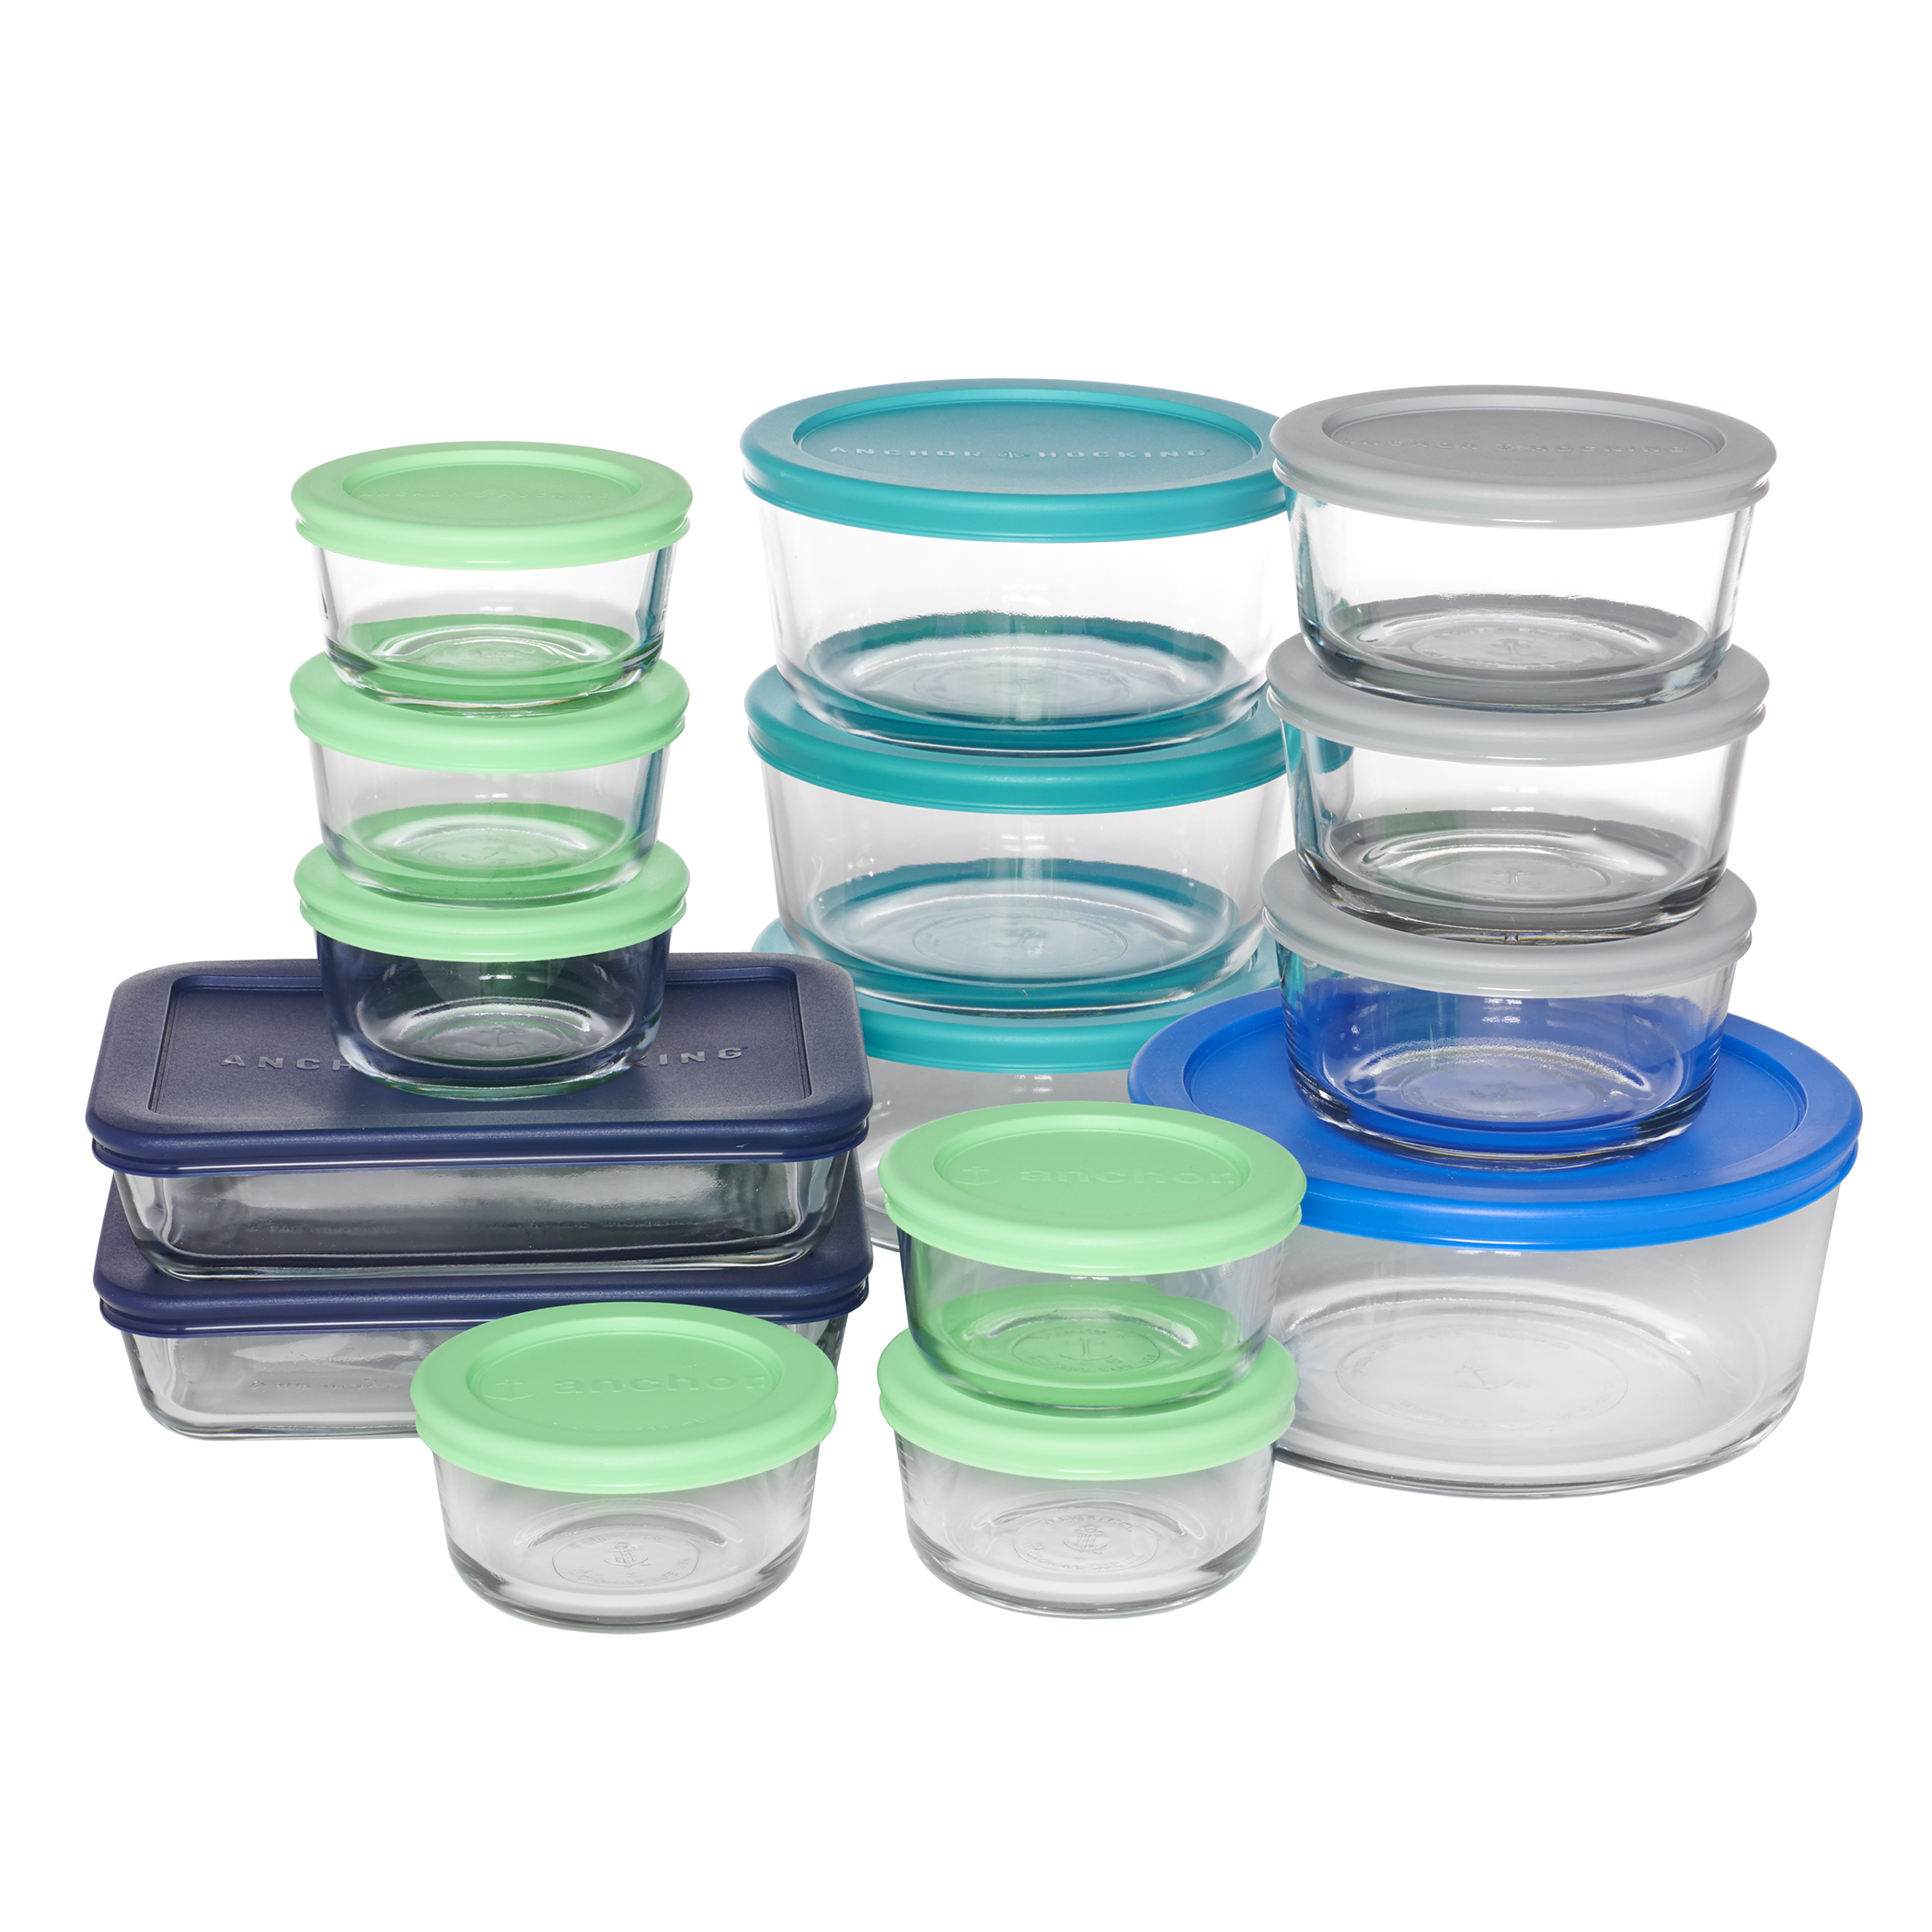 Anchor Hocking Glass Food Storage Containers with Lids, 30 Piece Set - image 1 of 5